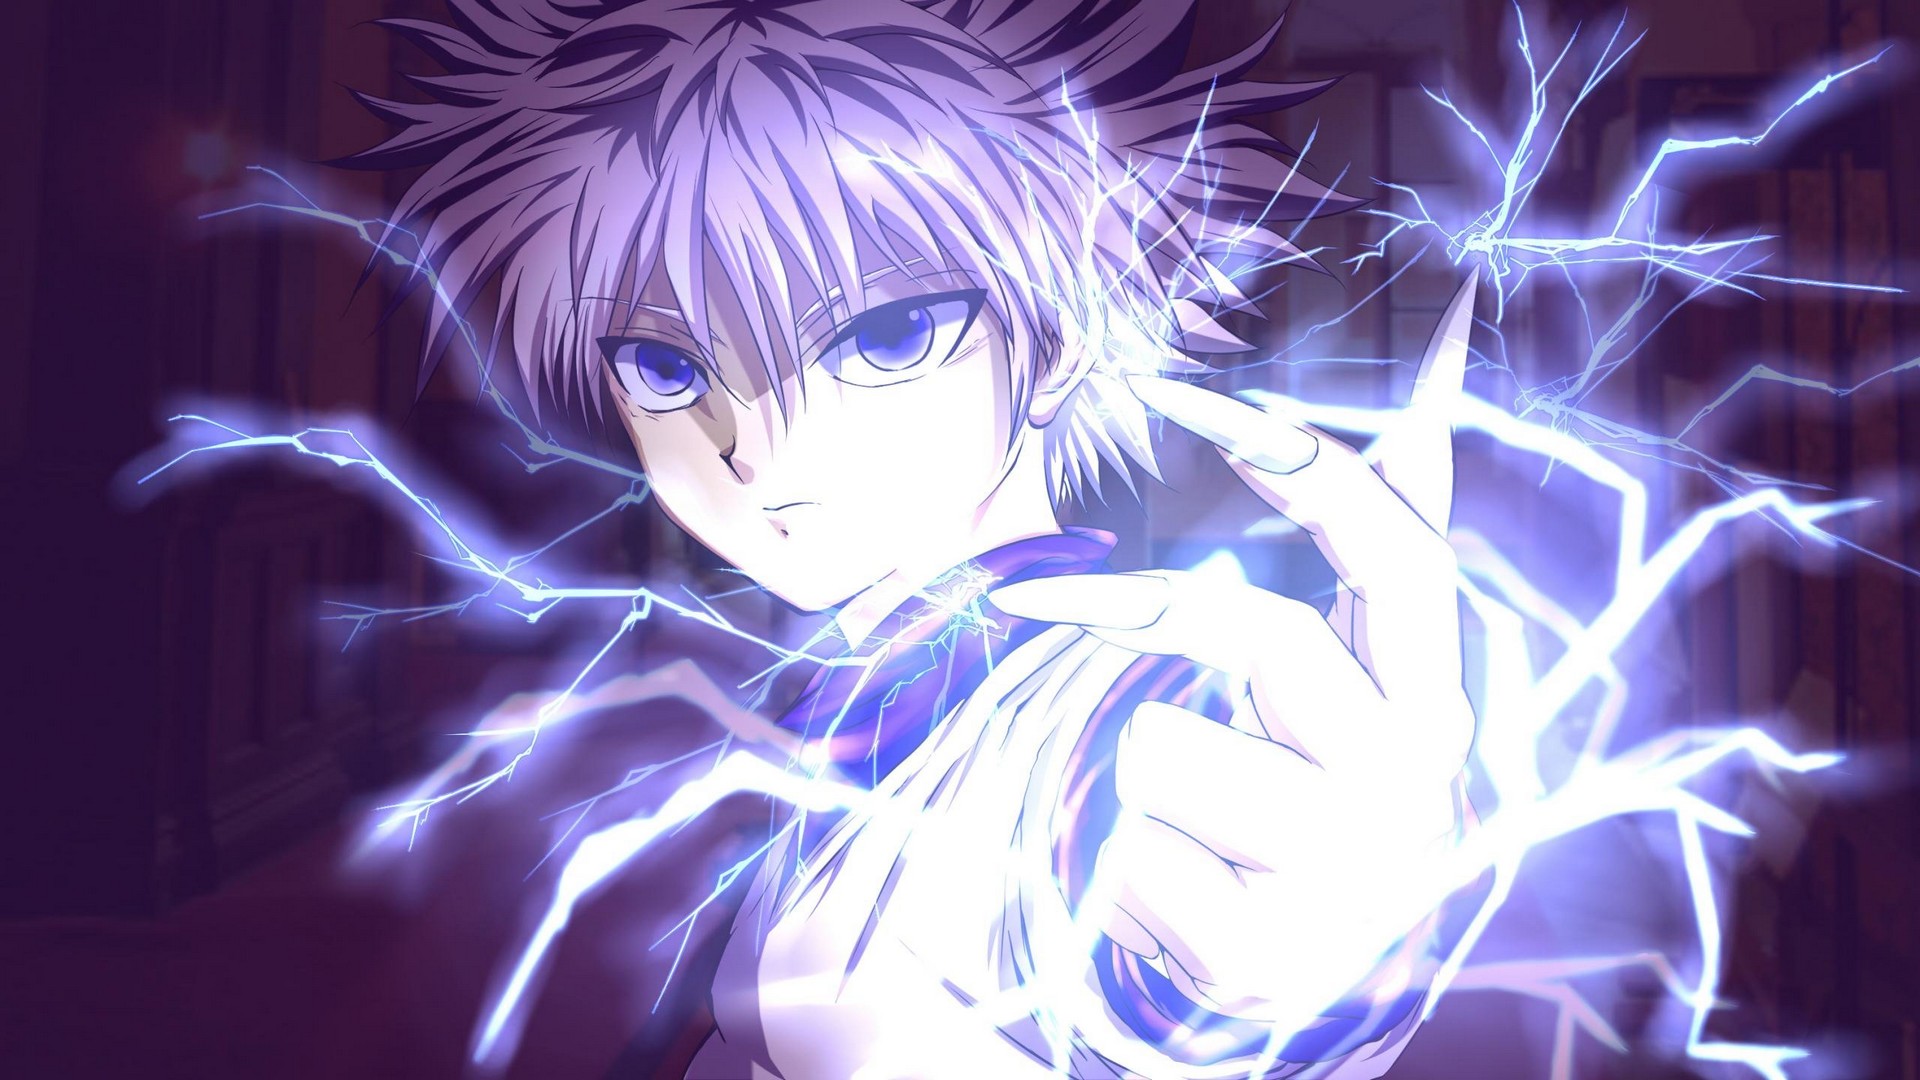 Killua Poster Wallpaper With high-resolution 1920X1080 pixel. You can use this poster wallpaper for your Desktop Computers, Mac Screensavers, Windows Backgrounds, iPhone Wallpapers, Tablet or Android Lock screen and another Mobile device